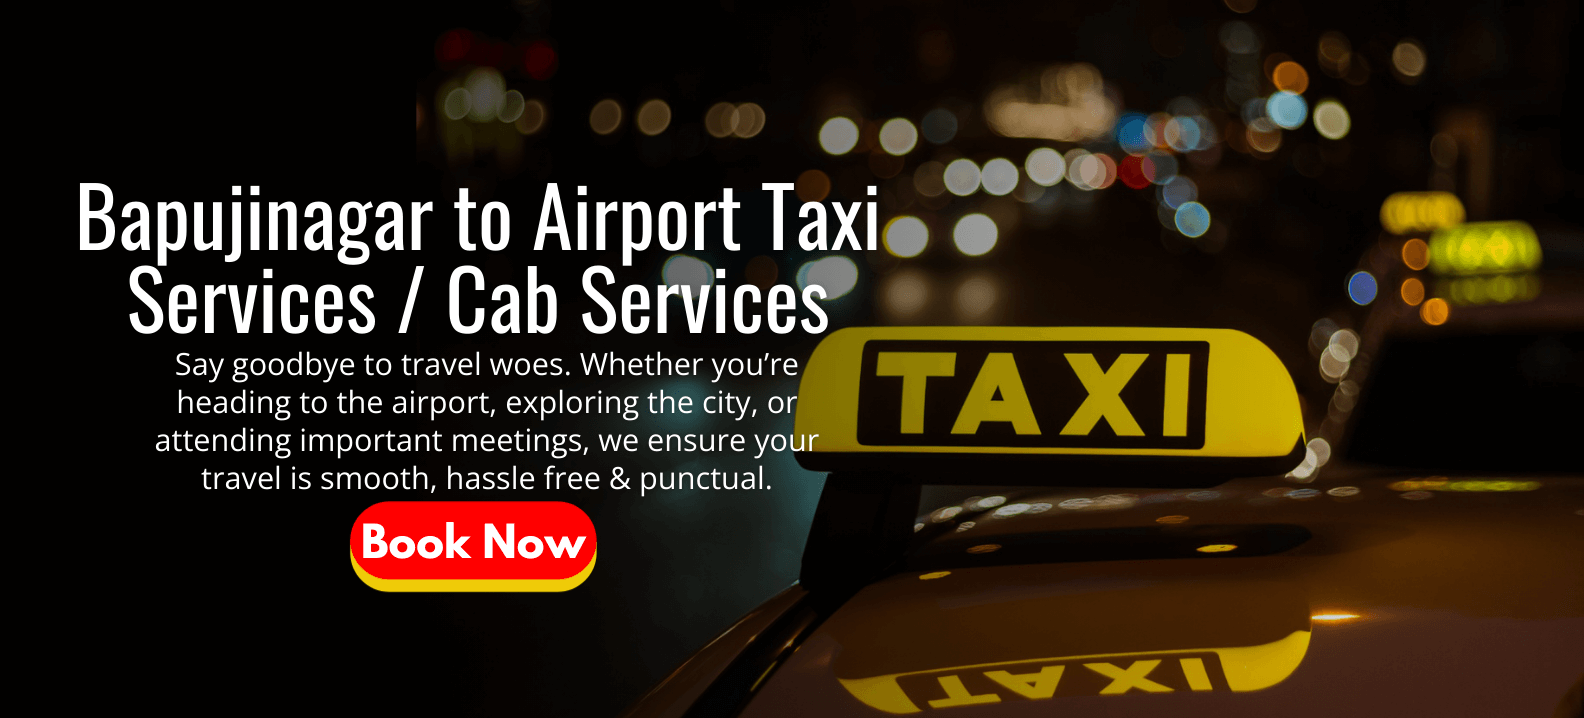 Bapujinagar to Airport Taxi Services _ Cab Services